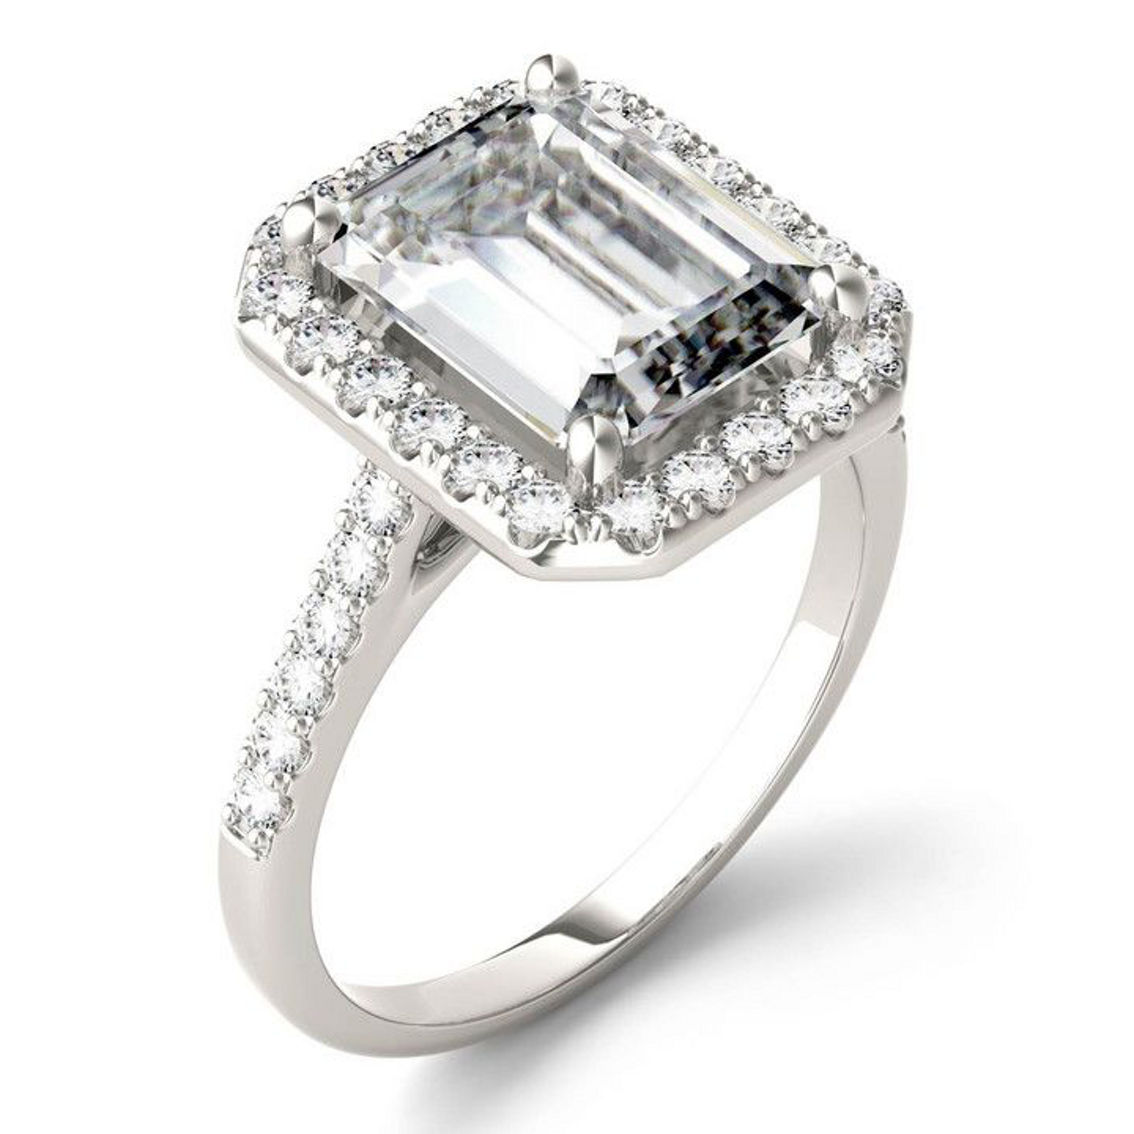 Charles & Colvard 4.06cttw Moissanite Emerald Cut Halo Engagement Ring in 14k Gold - Image 2 of 5